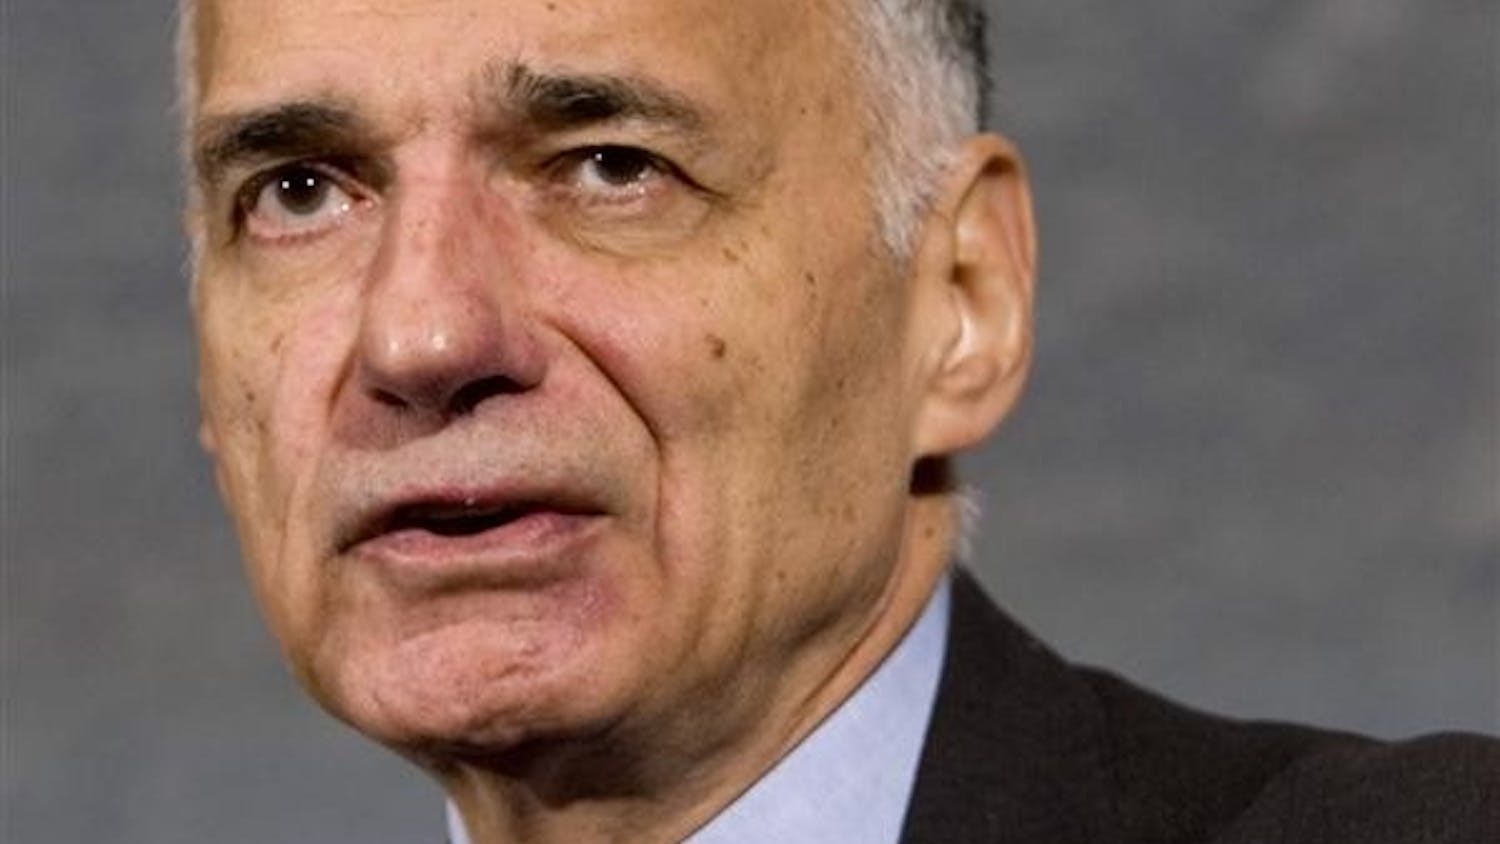 Independent presidential candidate Ralph Nader shows a copy of the U.S. Constitution during a news conference on Sept. 10 at the National Press Club in Washington.